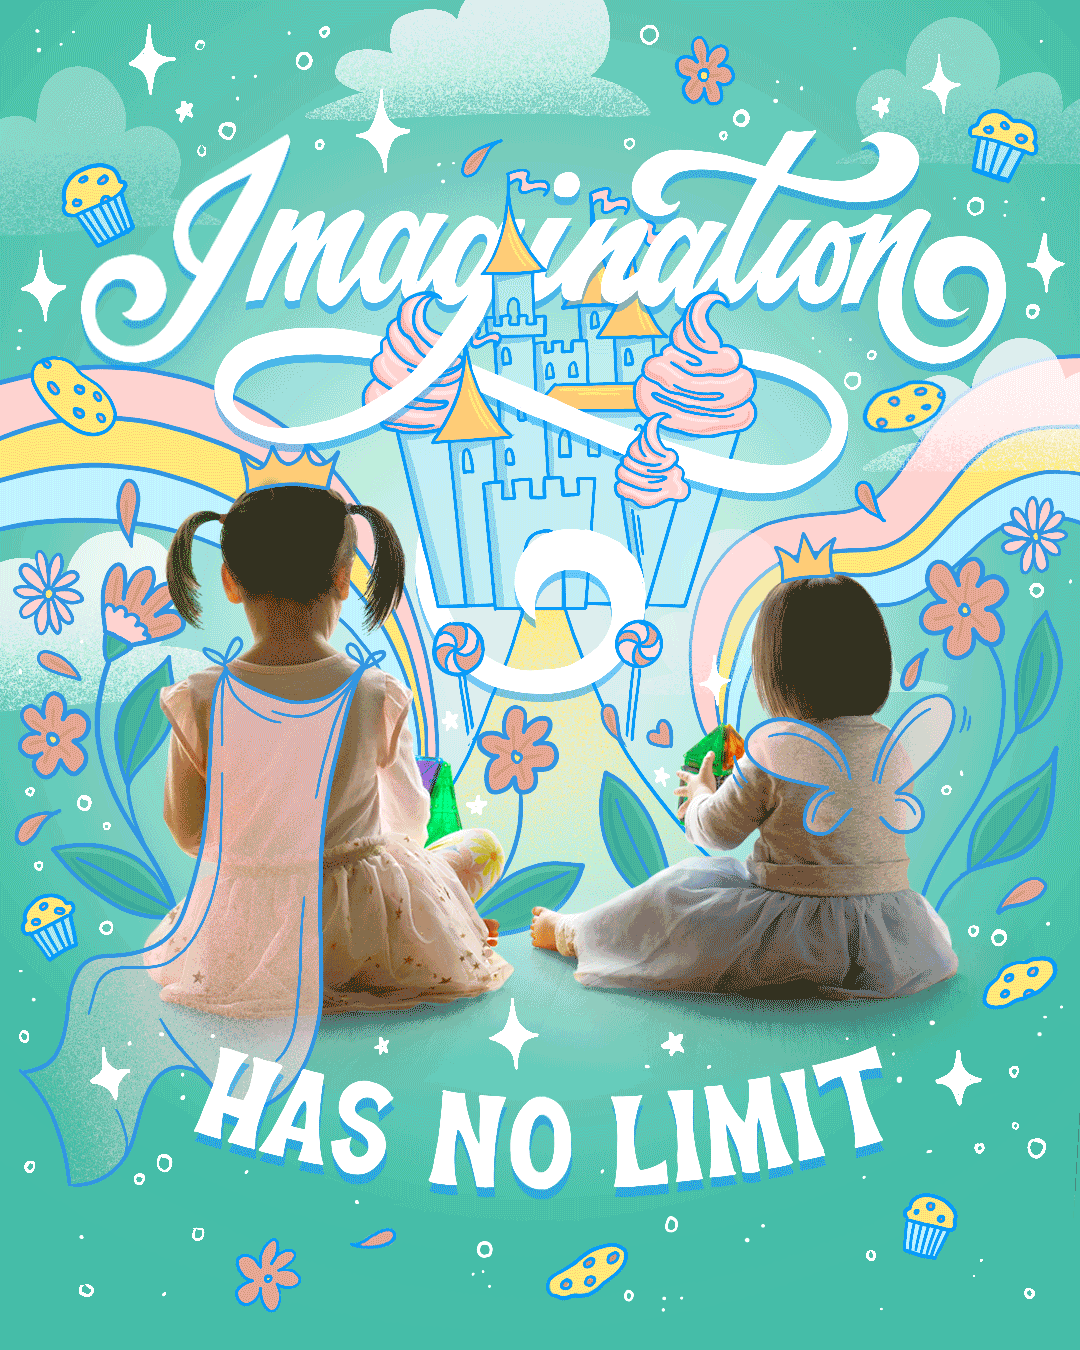 Magical, animated digital illustration on photo of two girls playing in an imaginary world